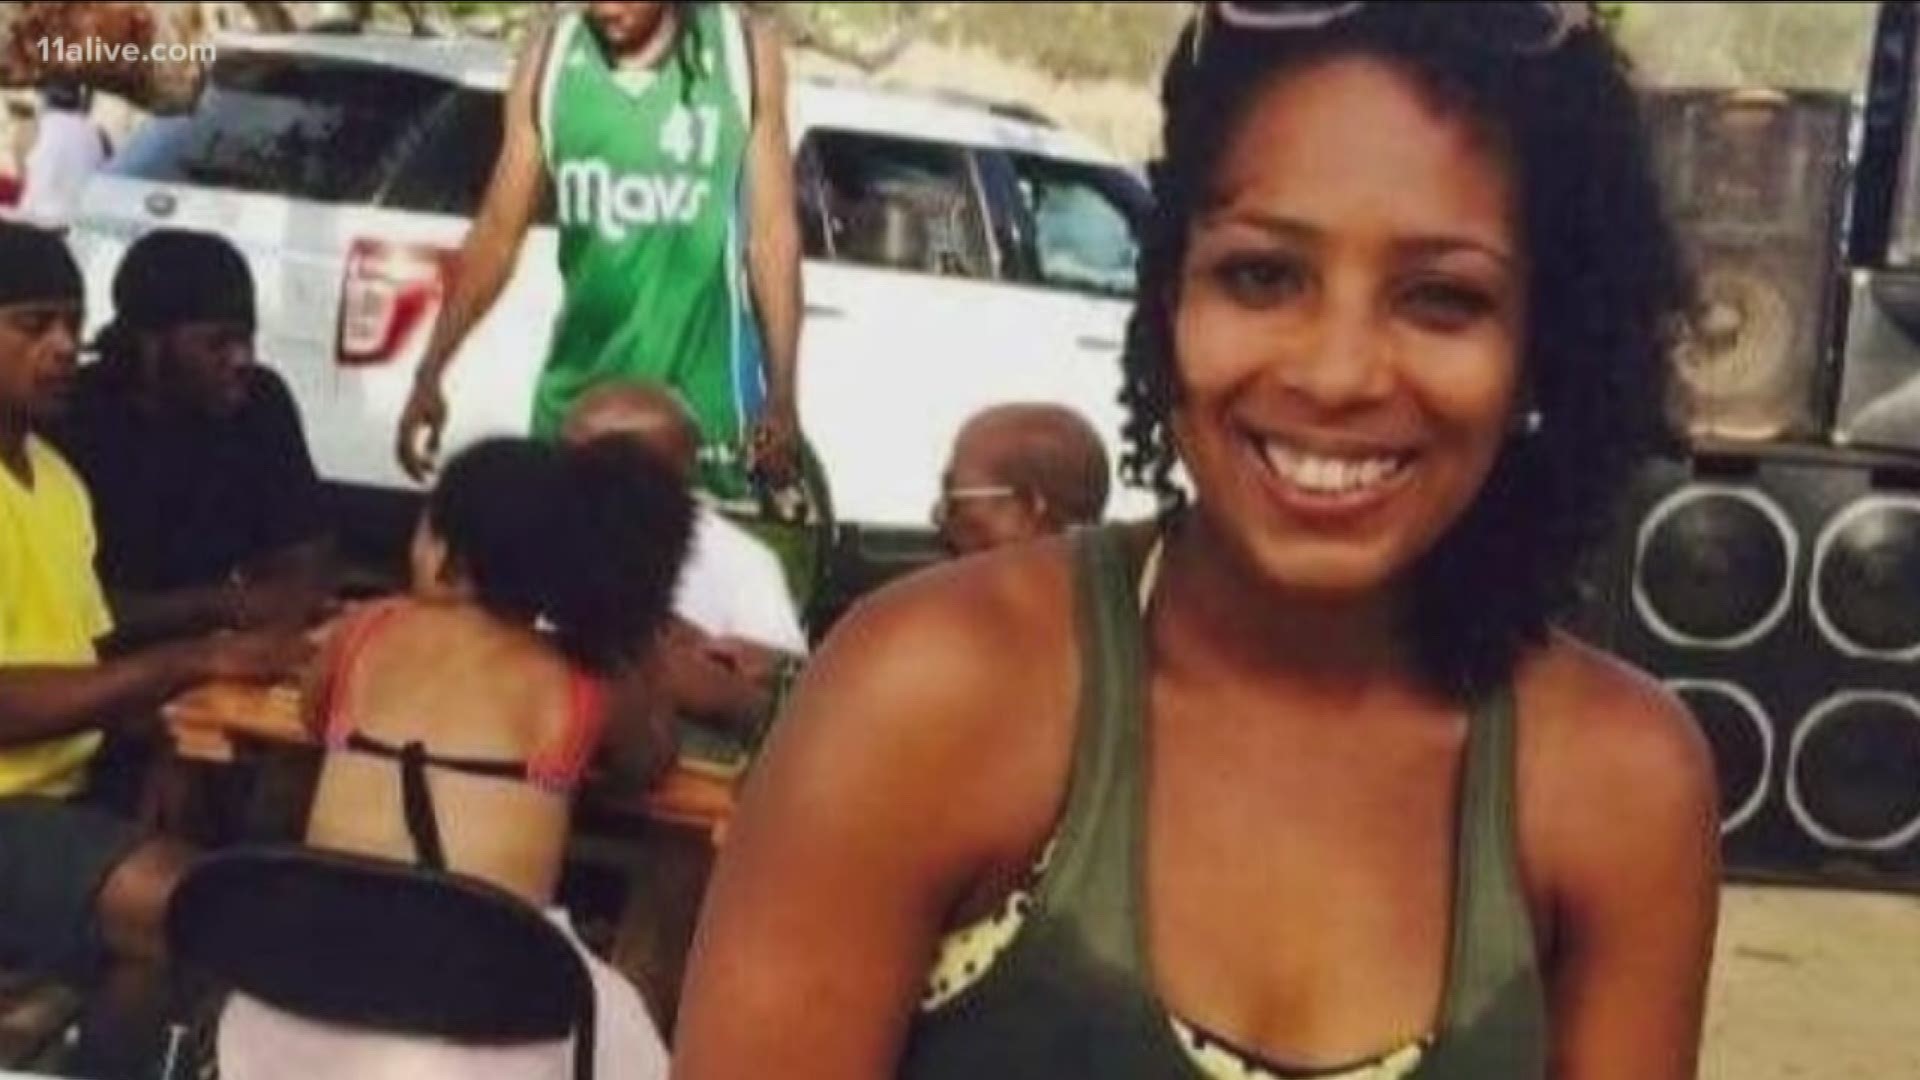 Horsford, a 40-year-old mother from Forsyth County, has become the center of a viral social media controversy after she died at an overnight house party surrounded by other adults.